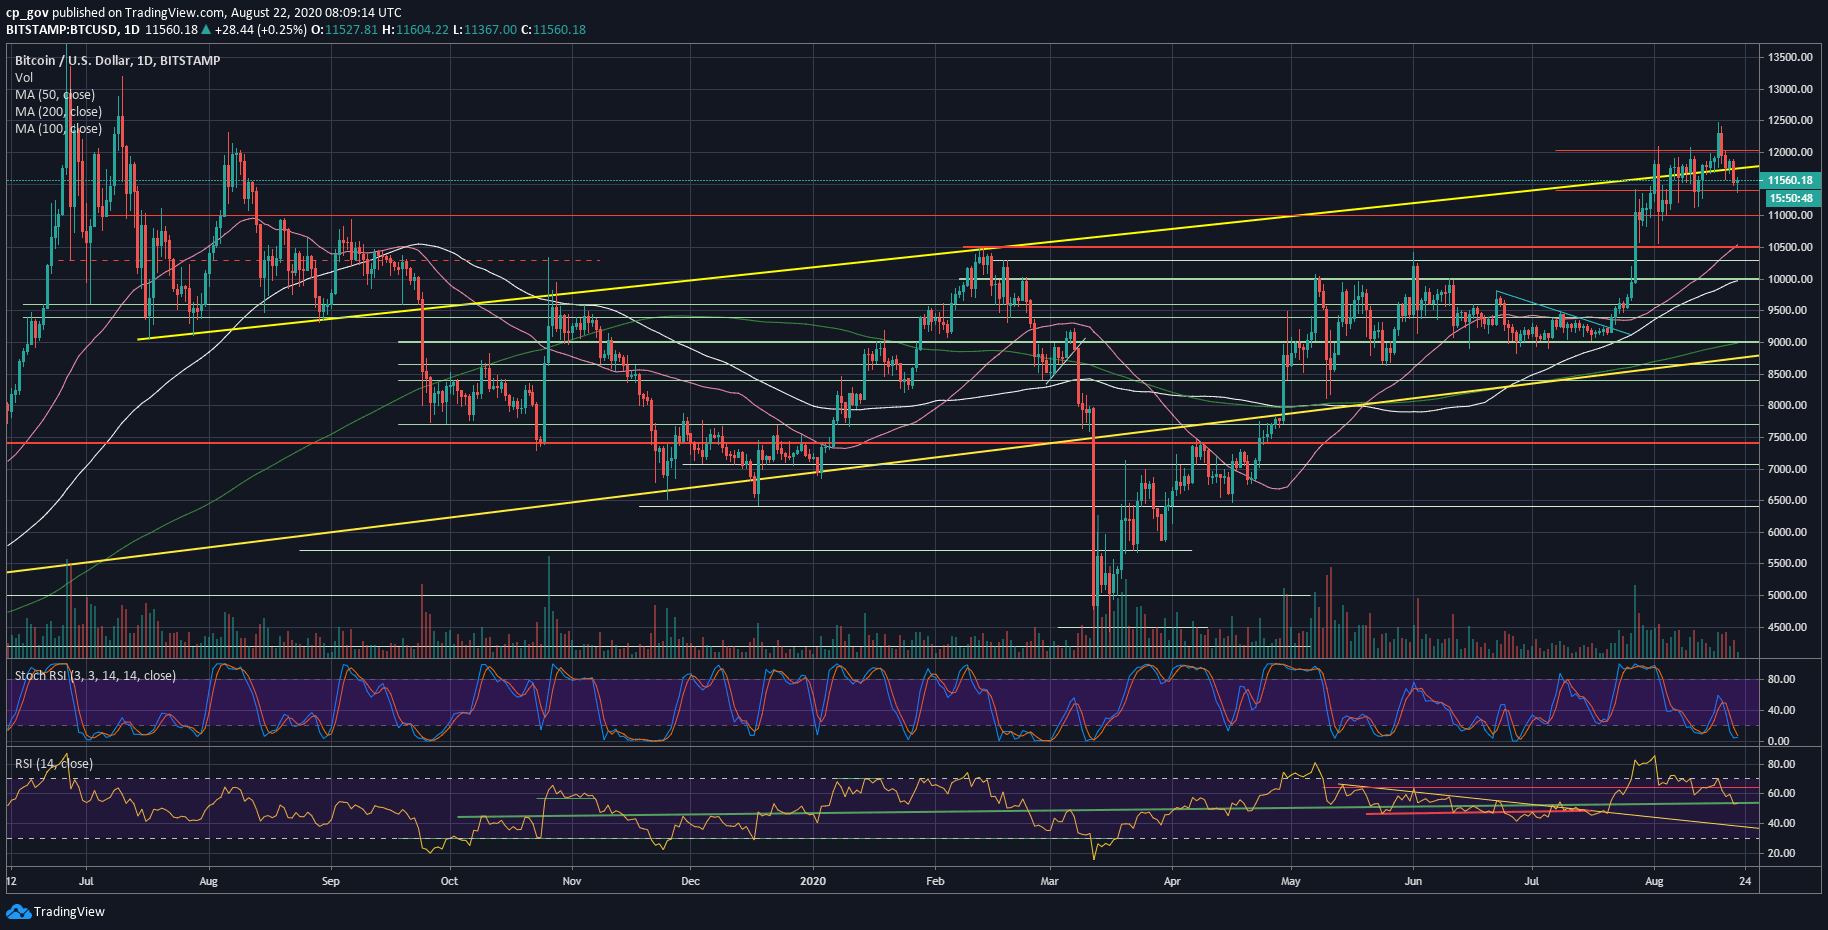 Bitcoin Eyes $10,500 After Losing Crucial Support Line: BTC Price Analysis